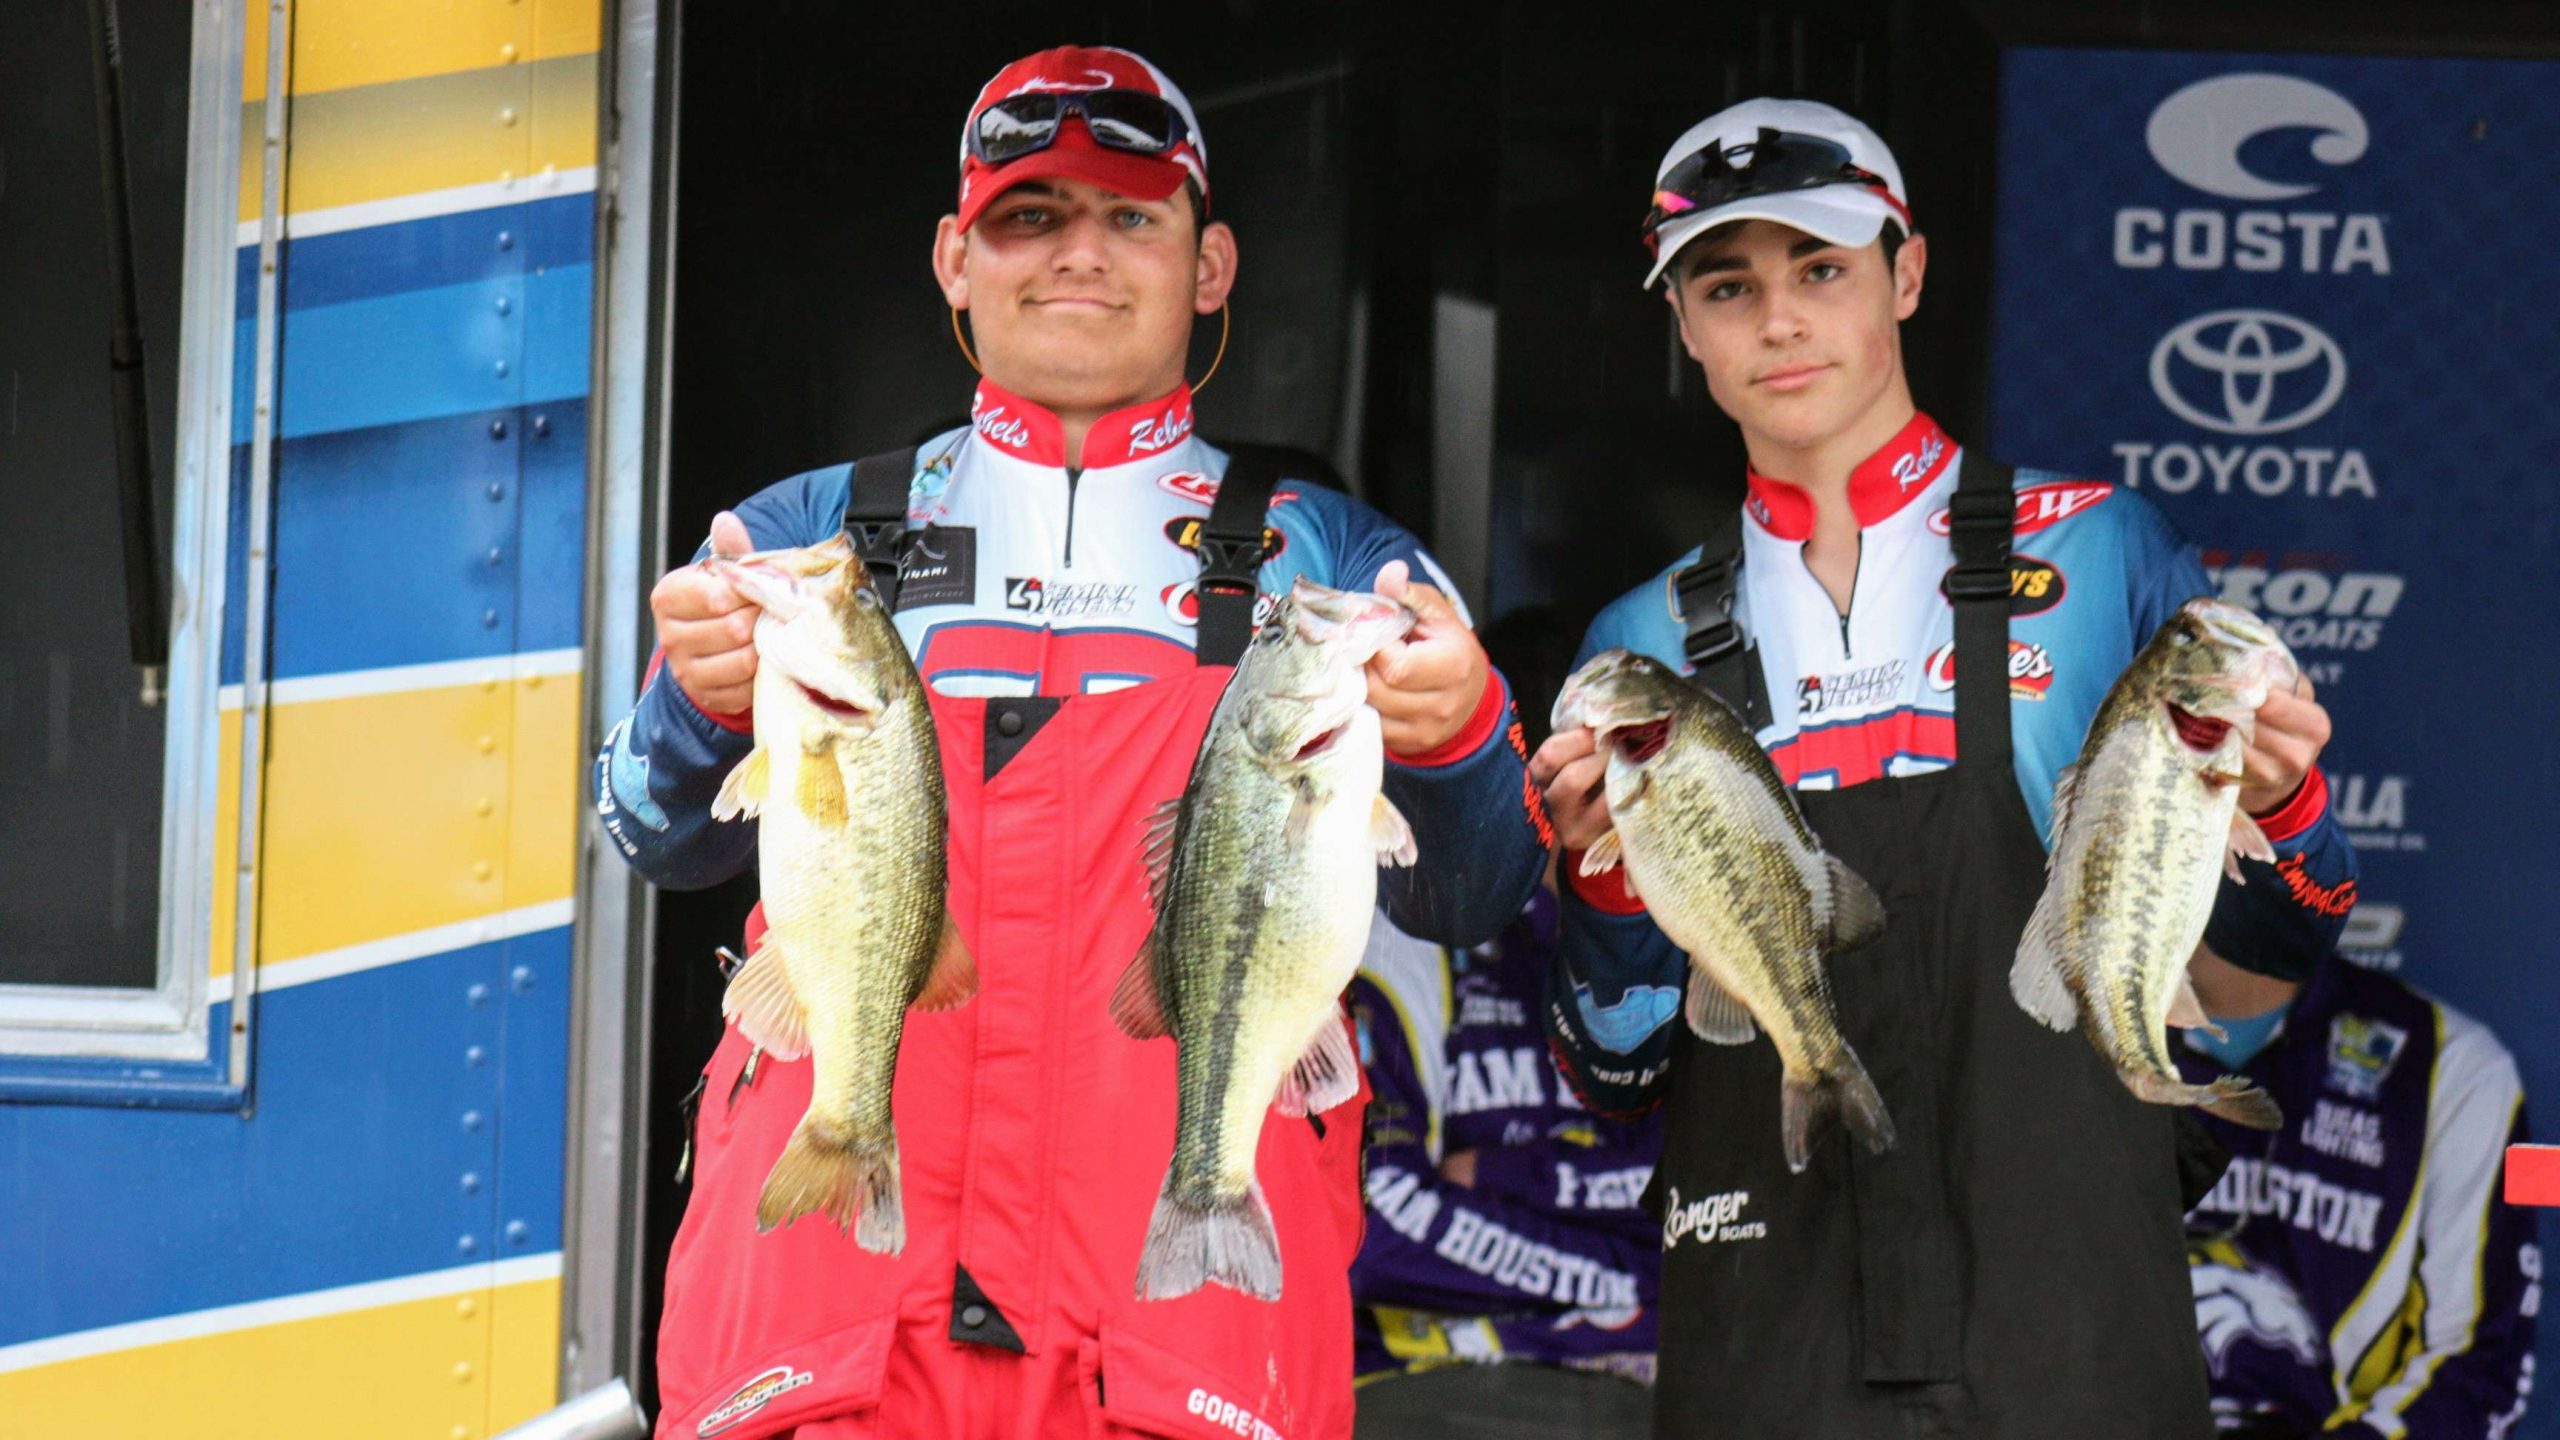 Jacob Tarpley and Keigan Maturin of the Teurlings Catholic (La.)
  High School team placed 14th with a 15-14 total.
